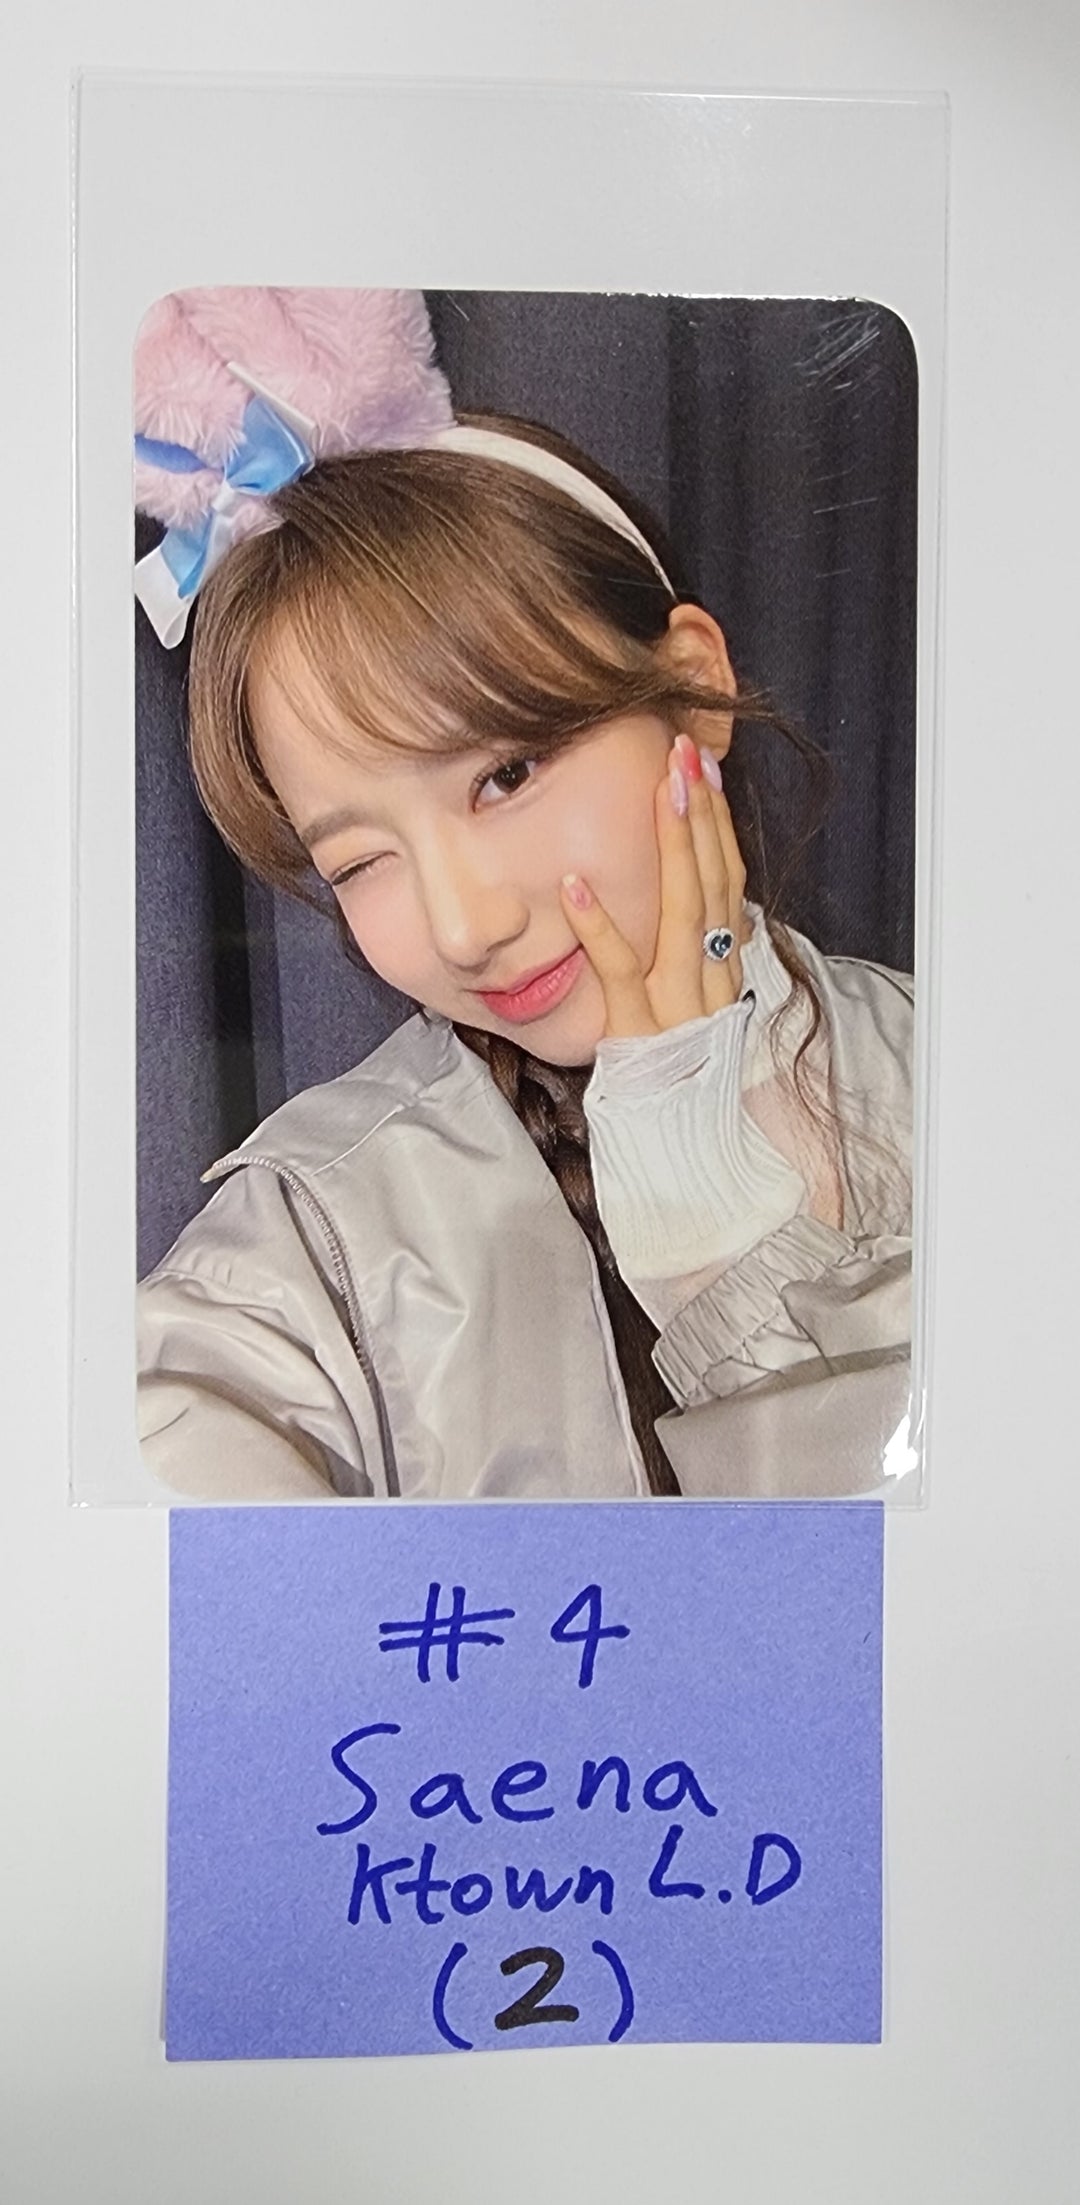 FIFTY FIFTY "The Beginning: Cupid" - Ktown4U Lucky Draw Event Photocard